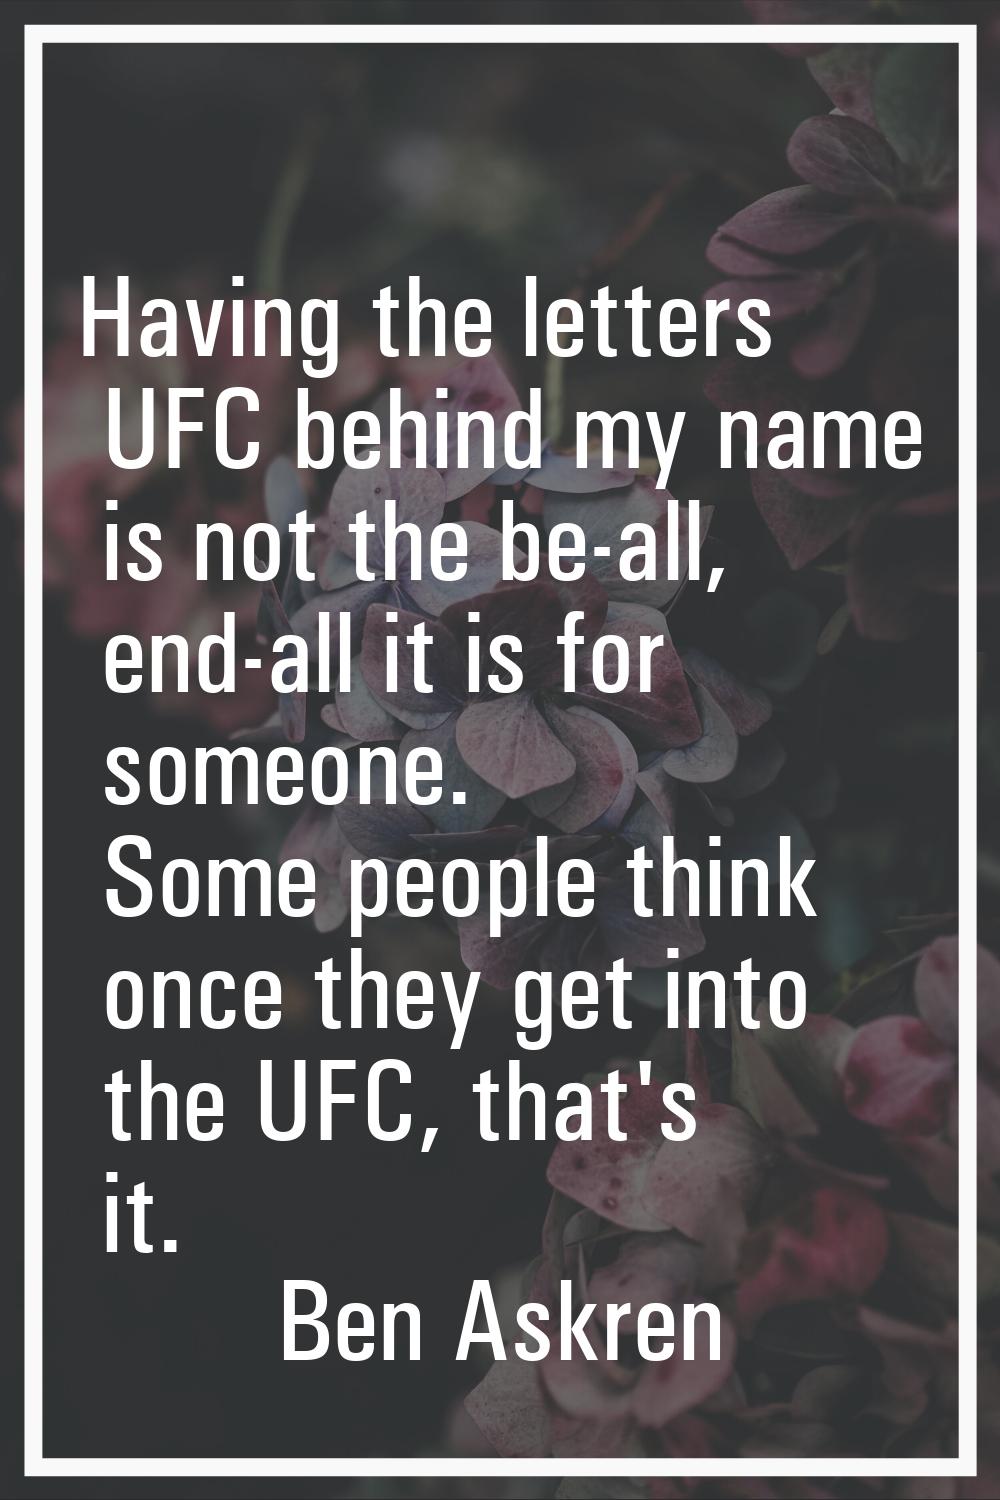 Having the letters UFC behind my name is not the be-all, end-all it is for someone. Some people thi